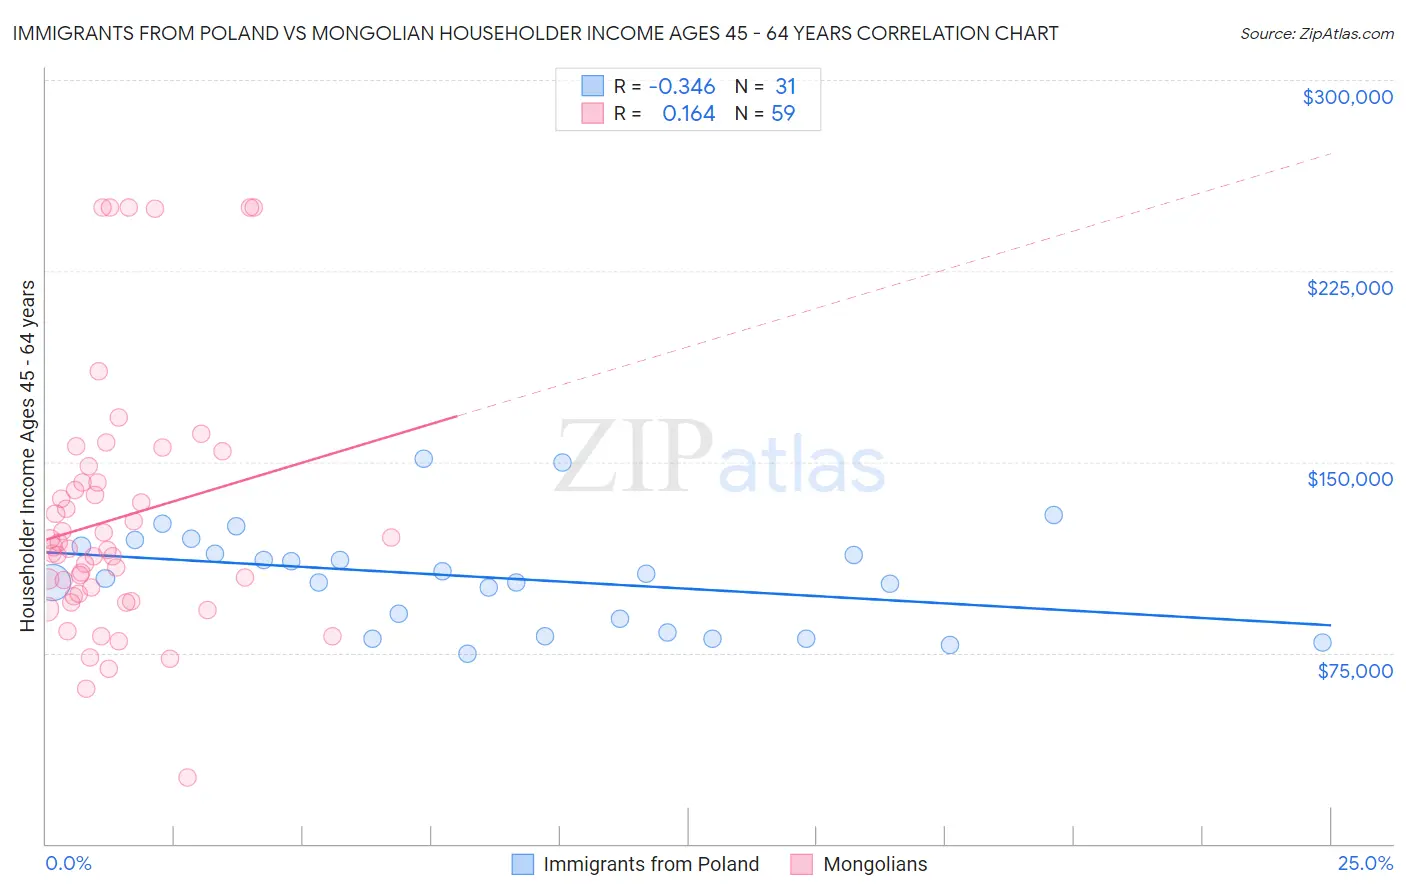 Immigrants from Poland vs Mongolian Householder Income Ages 45 - 64 years